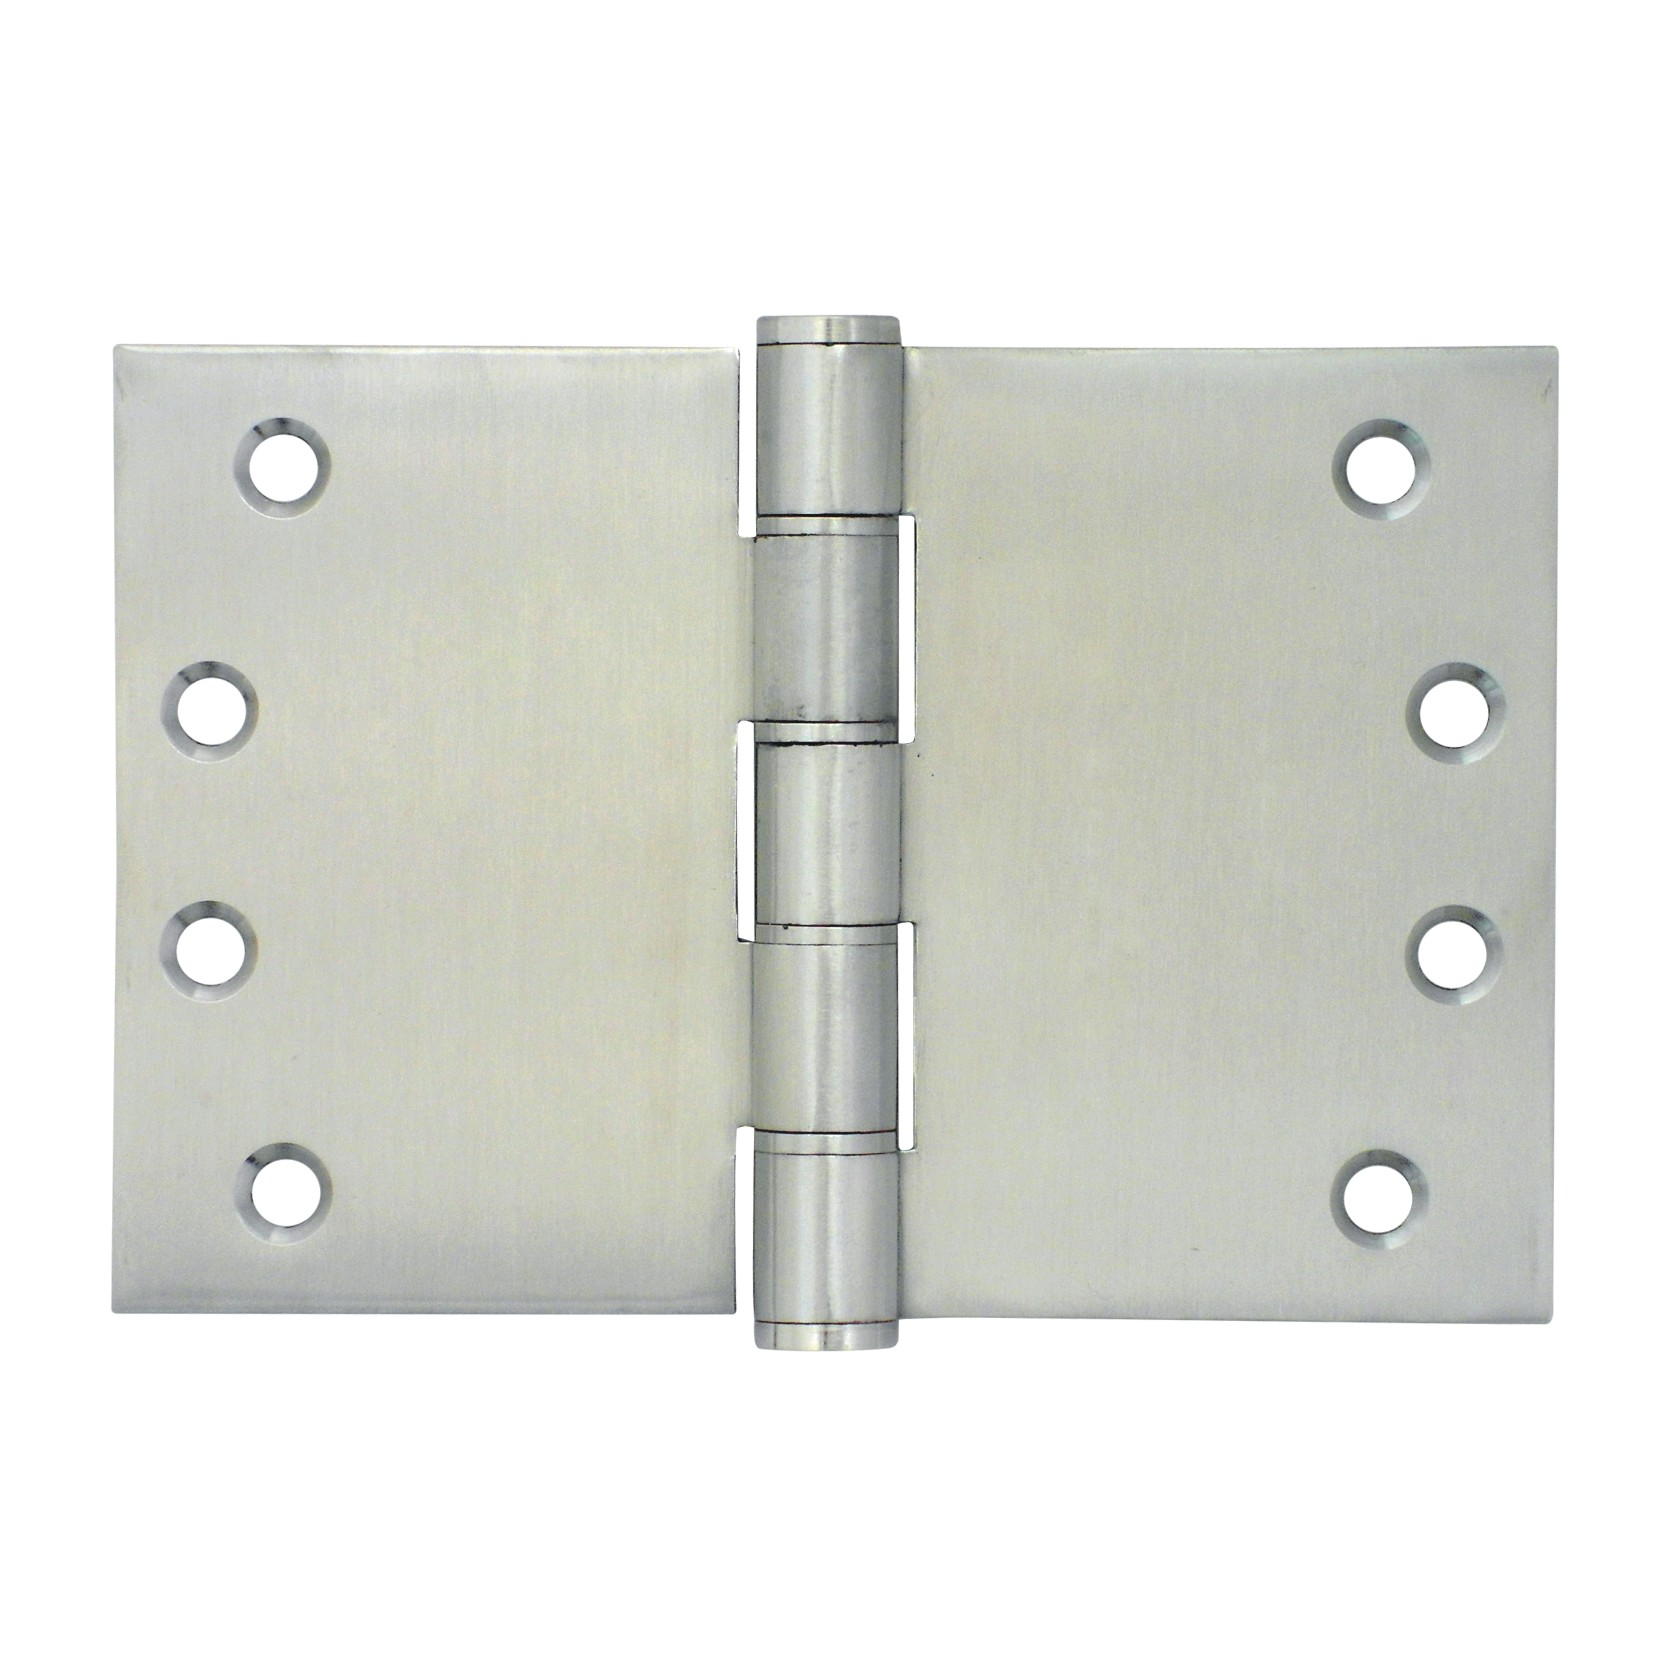 Stainless Steel Projection Hinge-washered -100x100x3.5mm